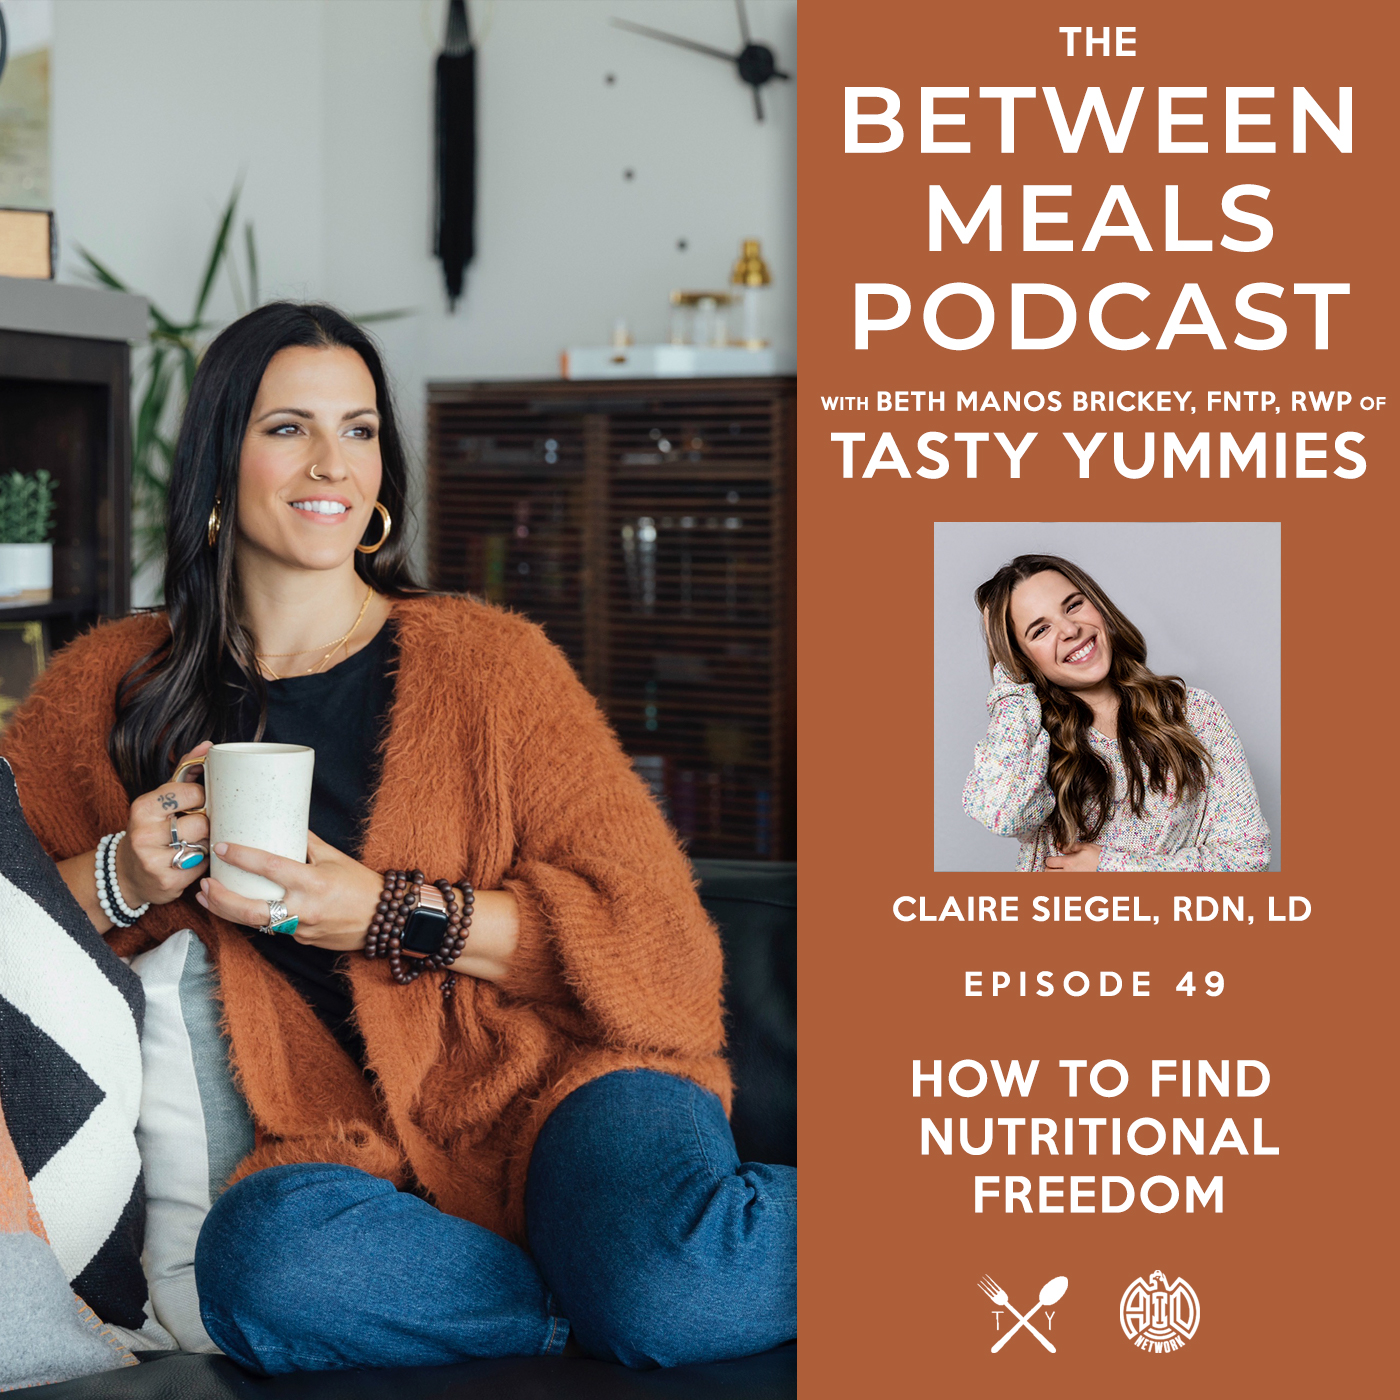 Between Meals Podcast. Episode 49: How To Find Nutritional Freedom